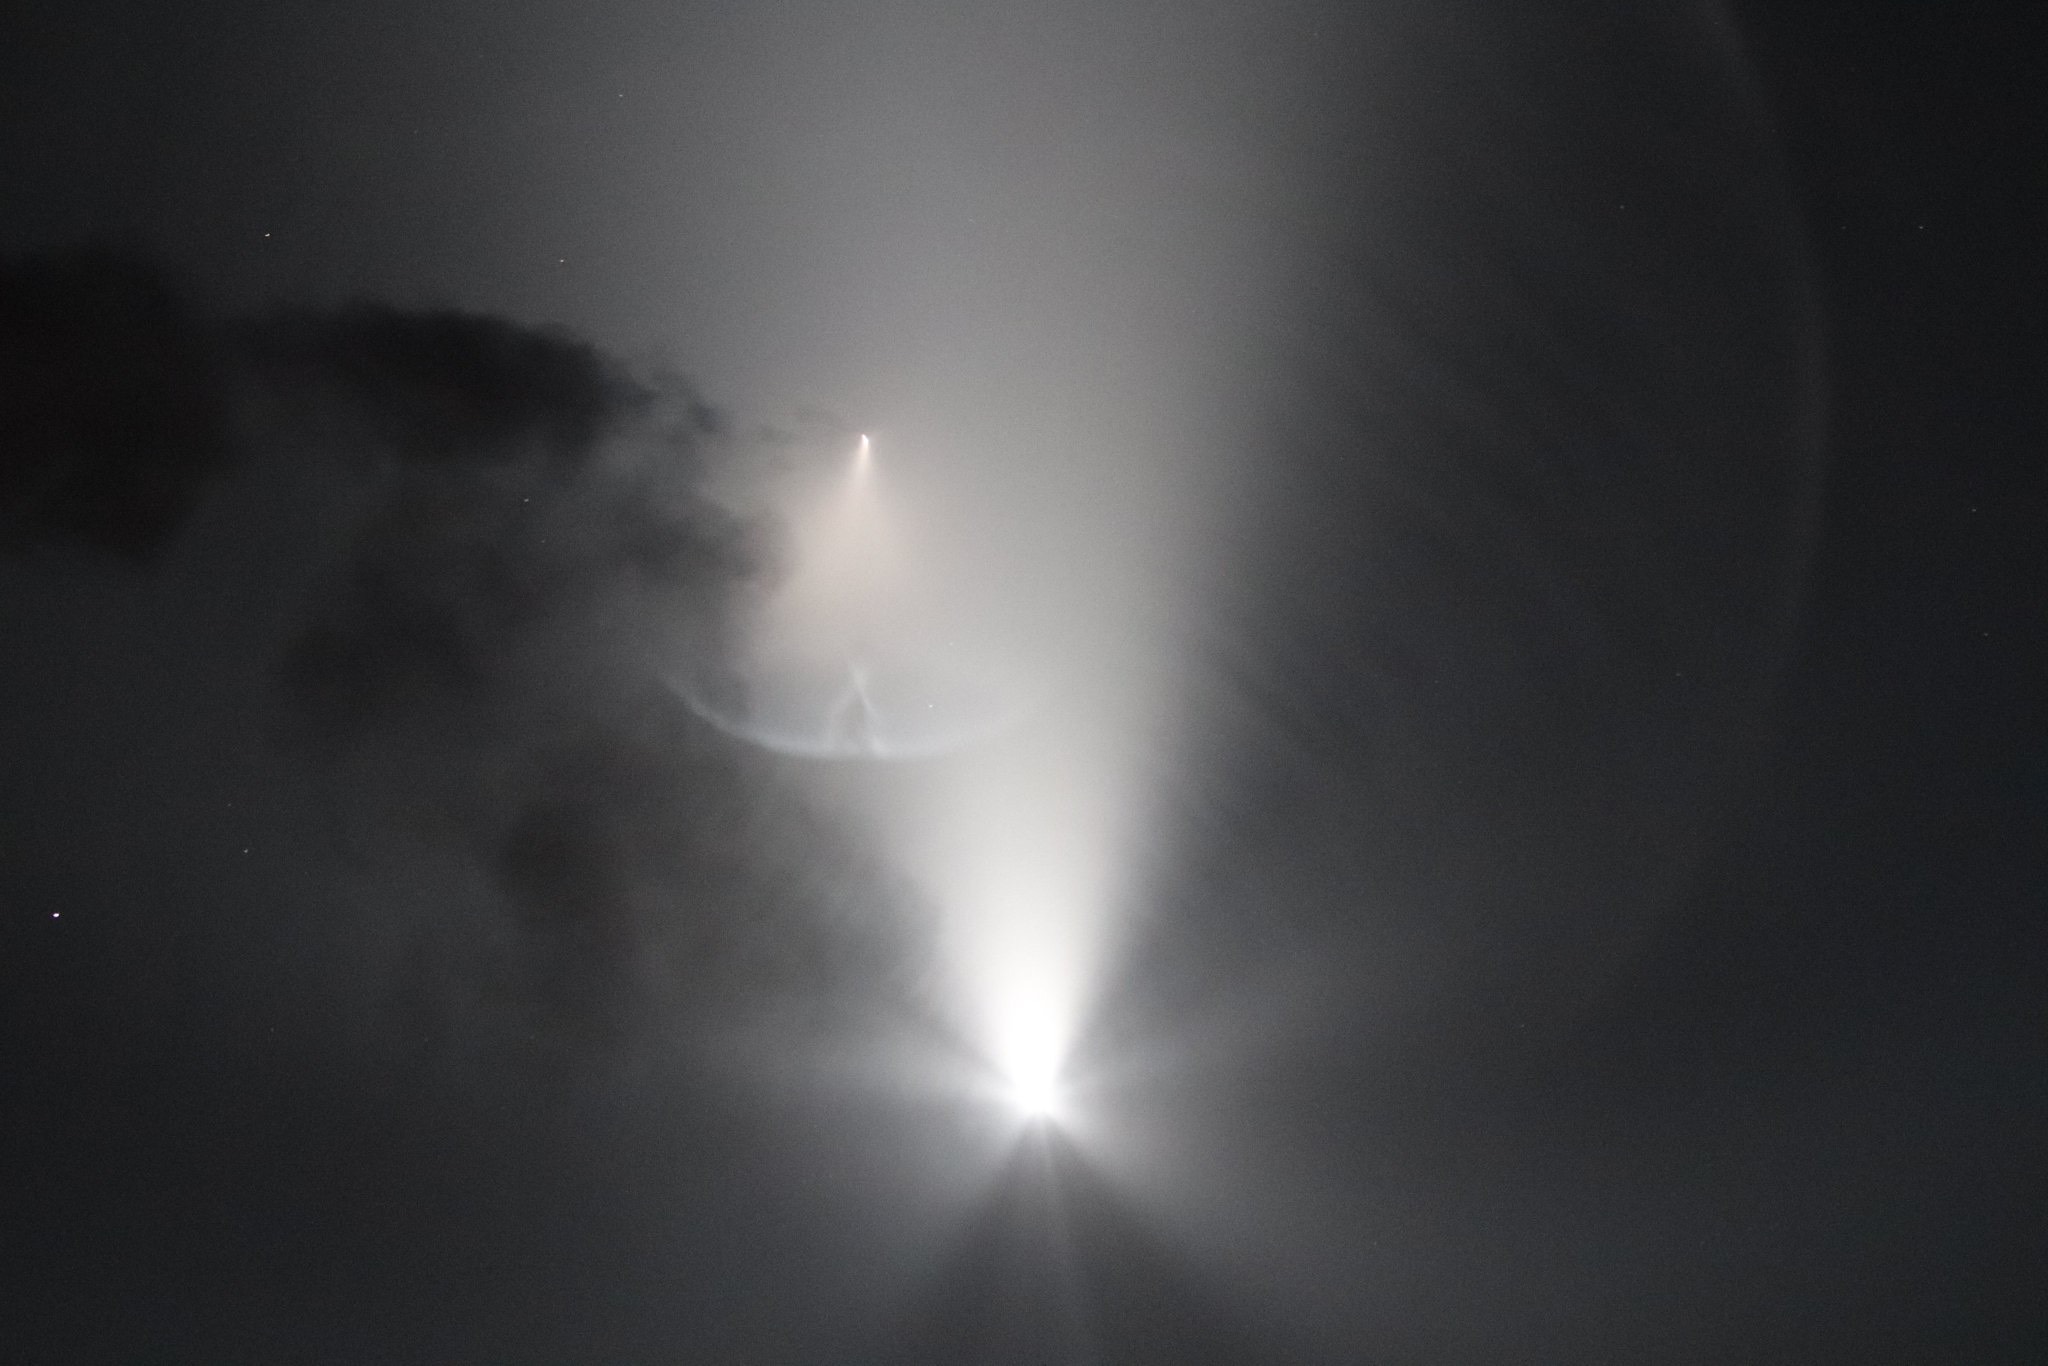 Space reporter Amy Thompson captured this stunning view of SpaceX's Crew-2 astronaut launch shortly after its Falcon 9 rocket lifted off before dawn at NASA's Kennedy Space Center, Florida on April 23, 2021.